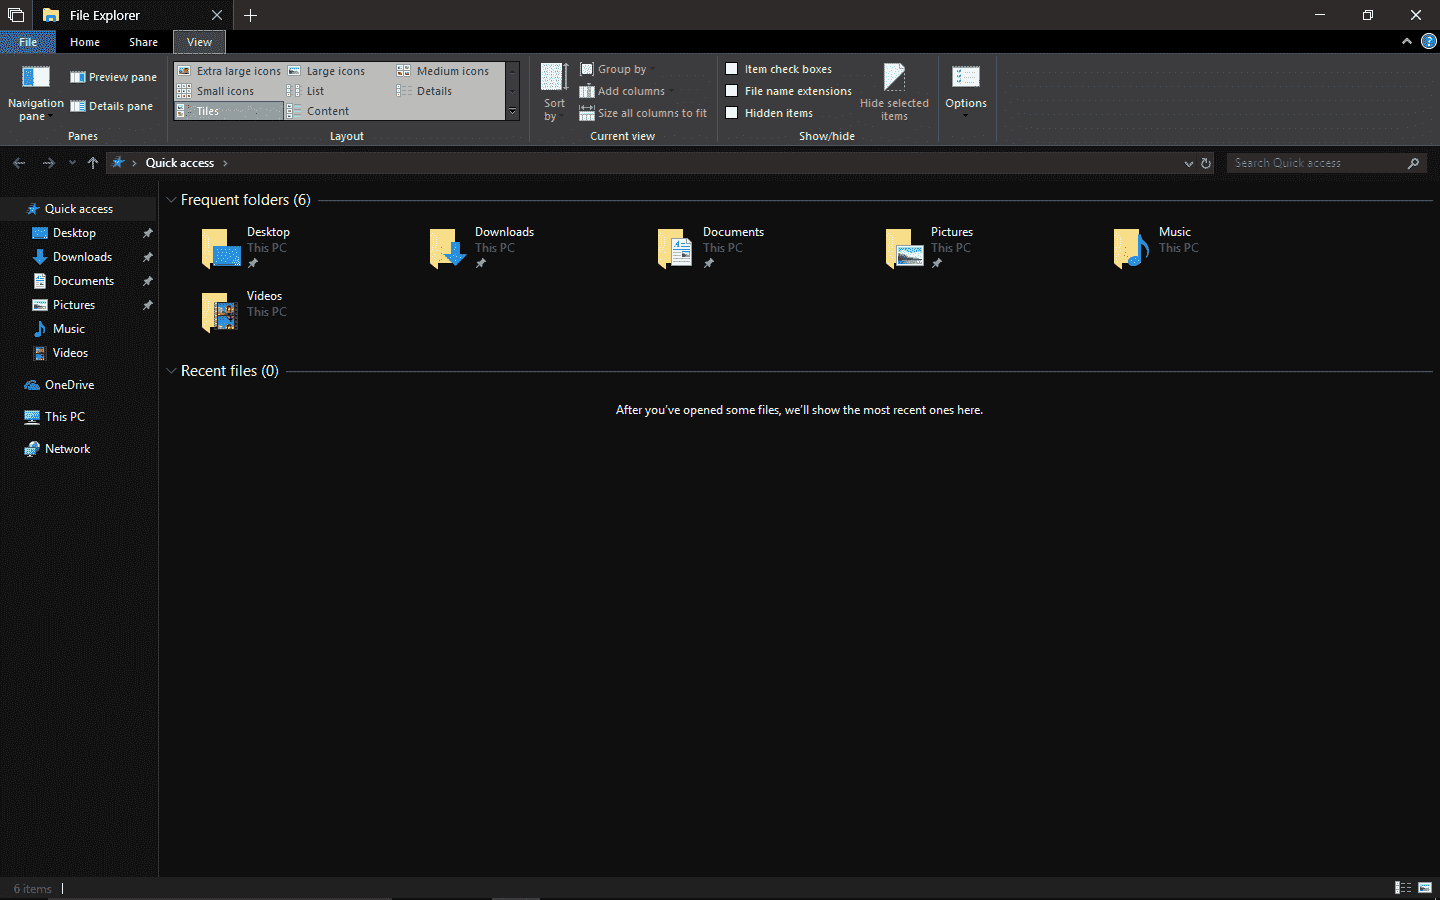 Inspired by Insiders - Dark Theme in File Explorer for Windows 10 ba28c750-6c8c-4abf-98d8-17449977f83d?upload=true.png